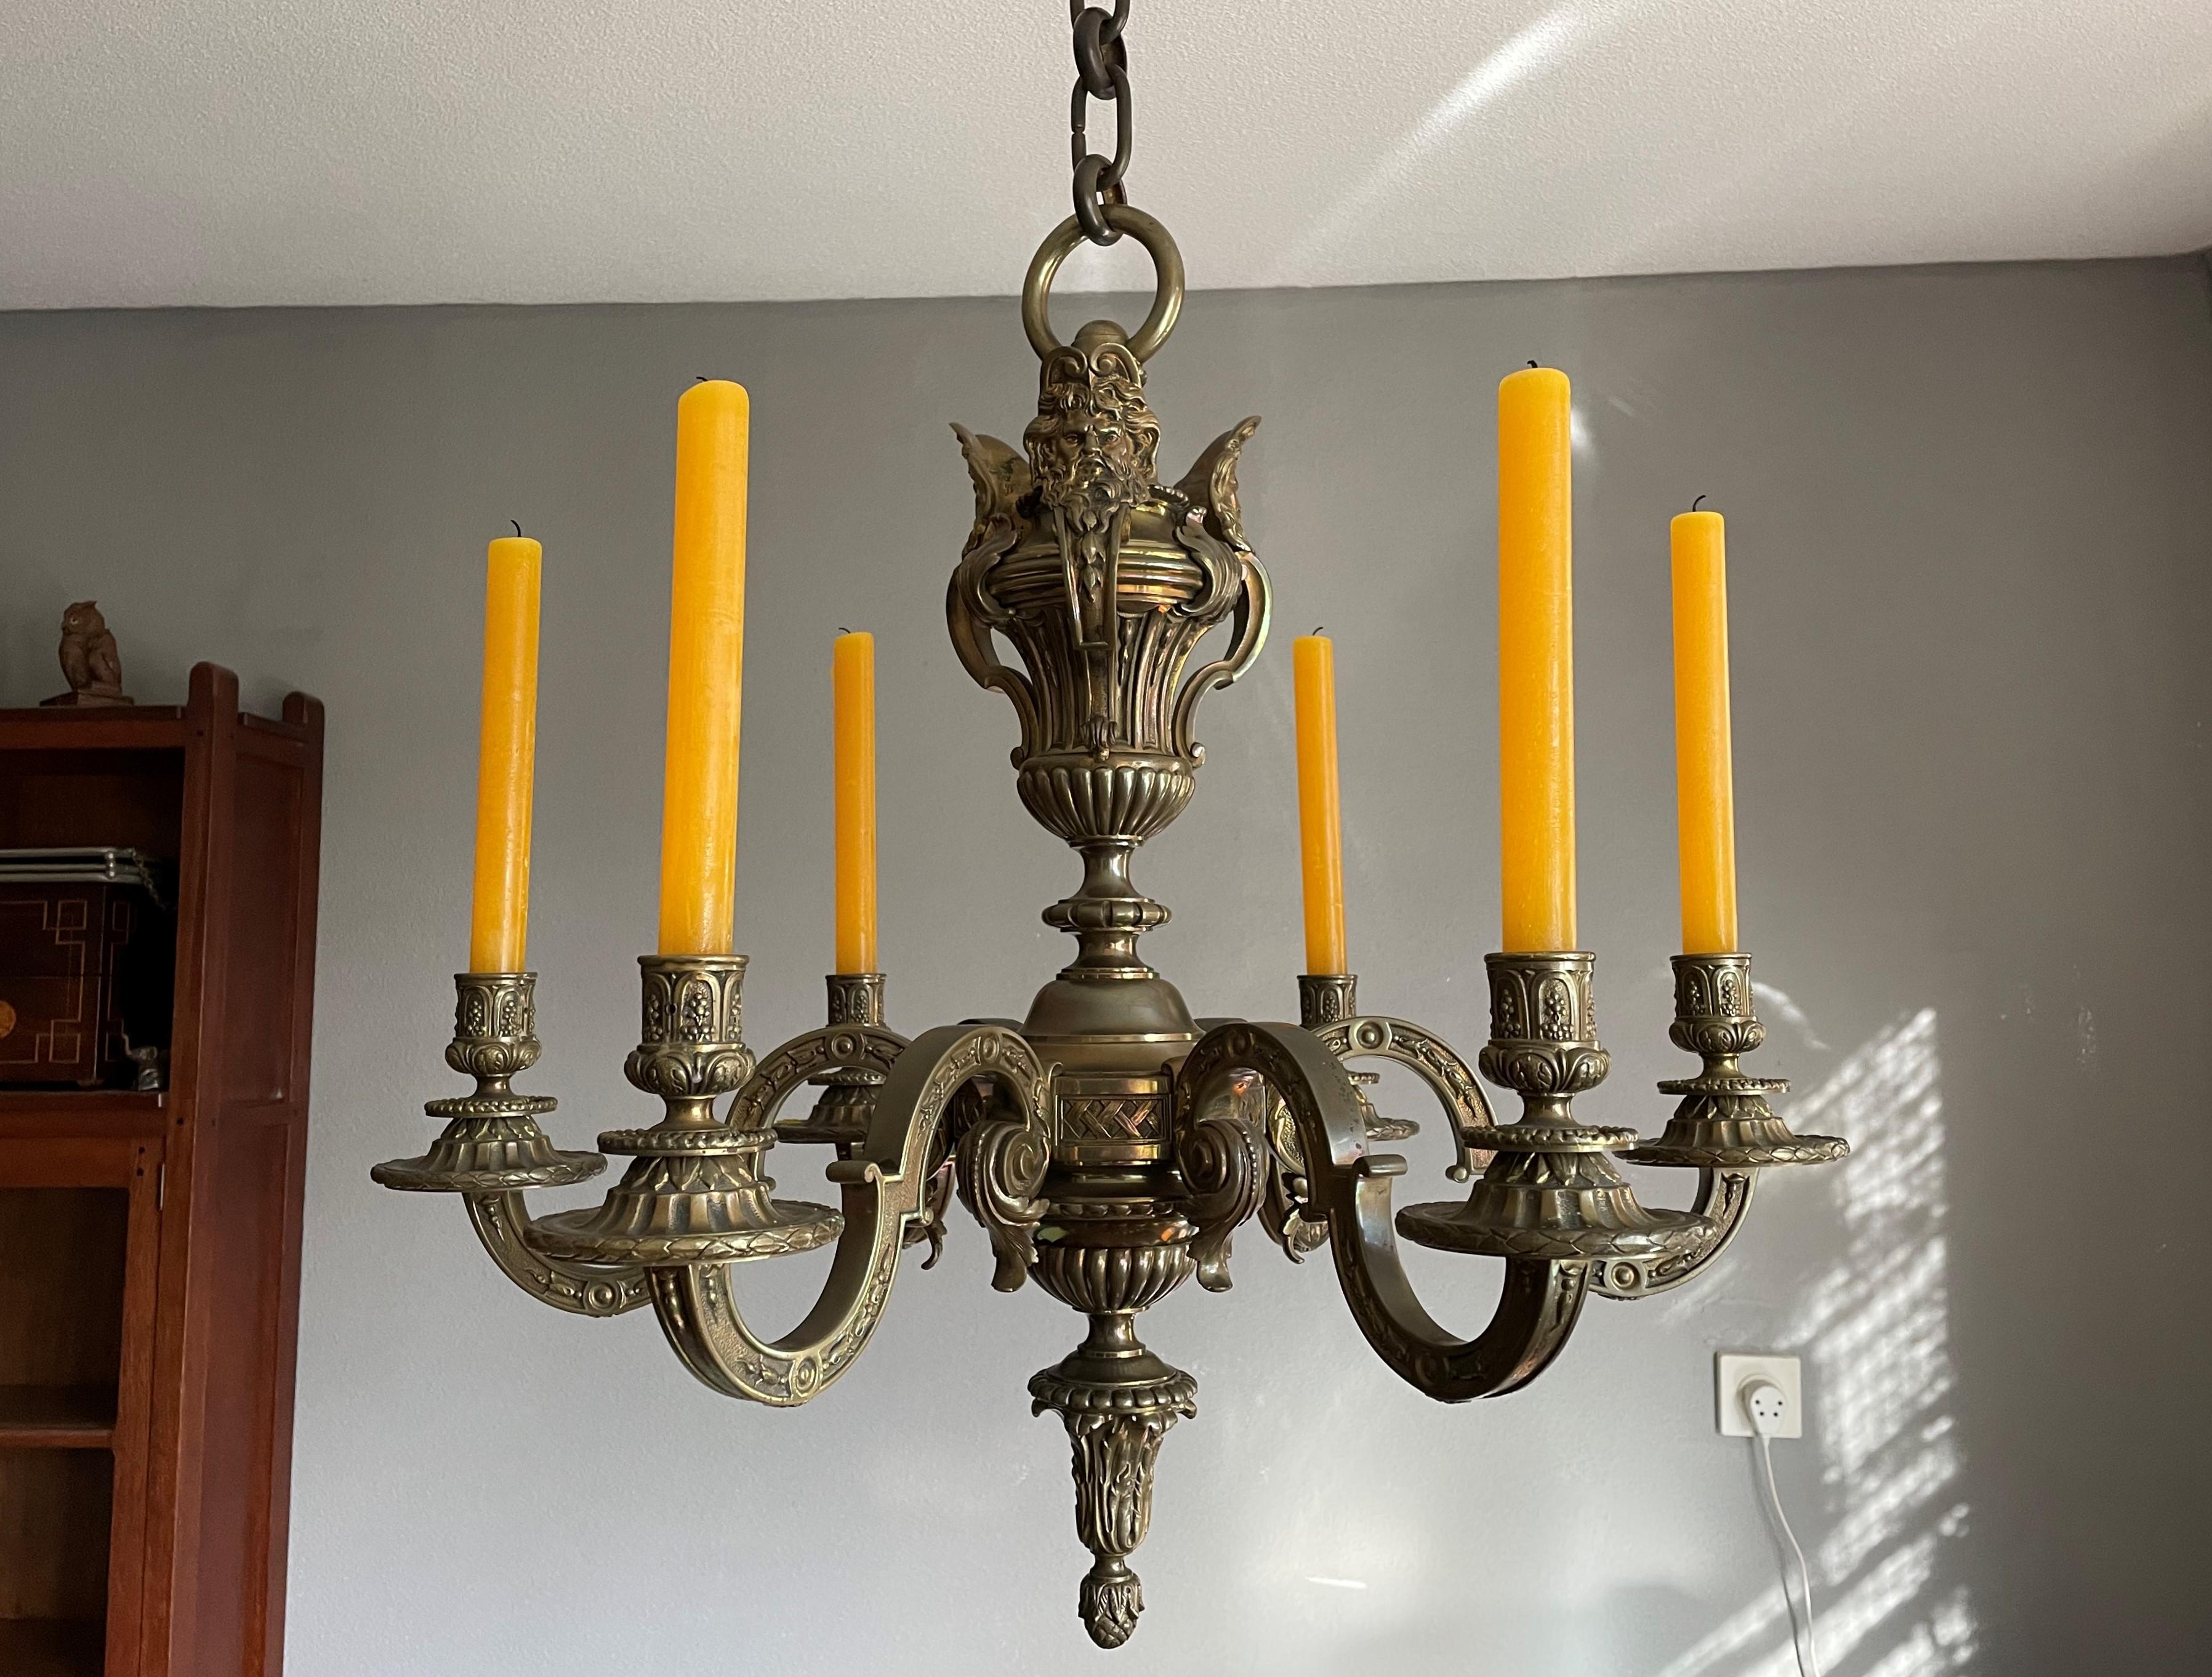 Remarkable bronze chandelier from 19th century France with striking masks of Zeus.

This top quality crafted, antique French chandelier is another great example showing that the French in those days were leading when it came to creating the best